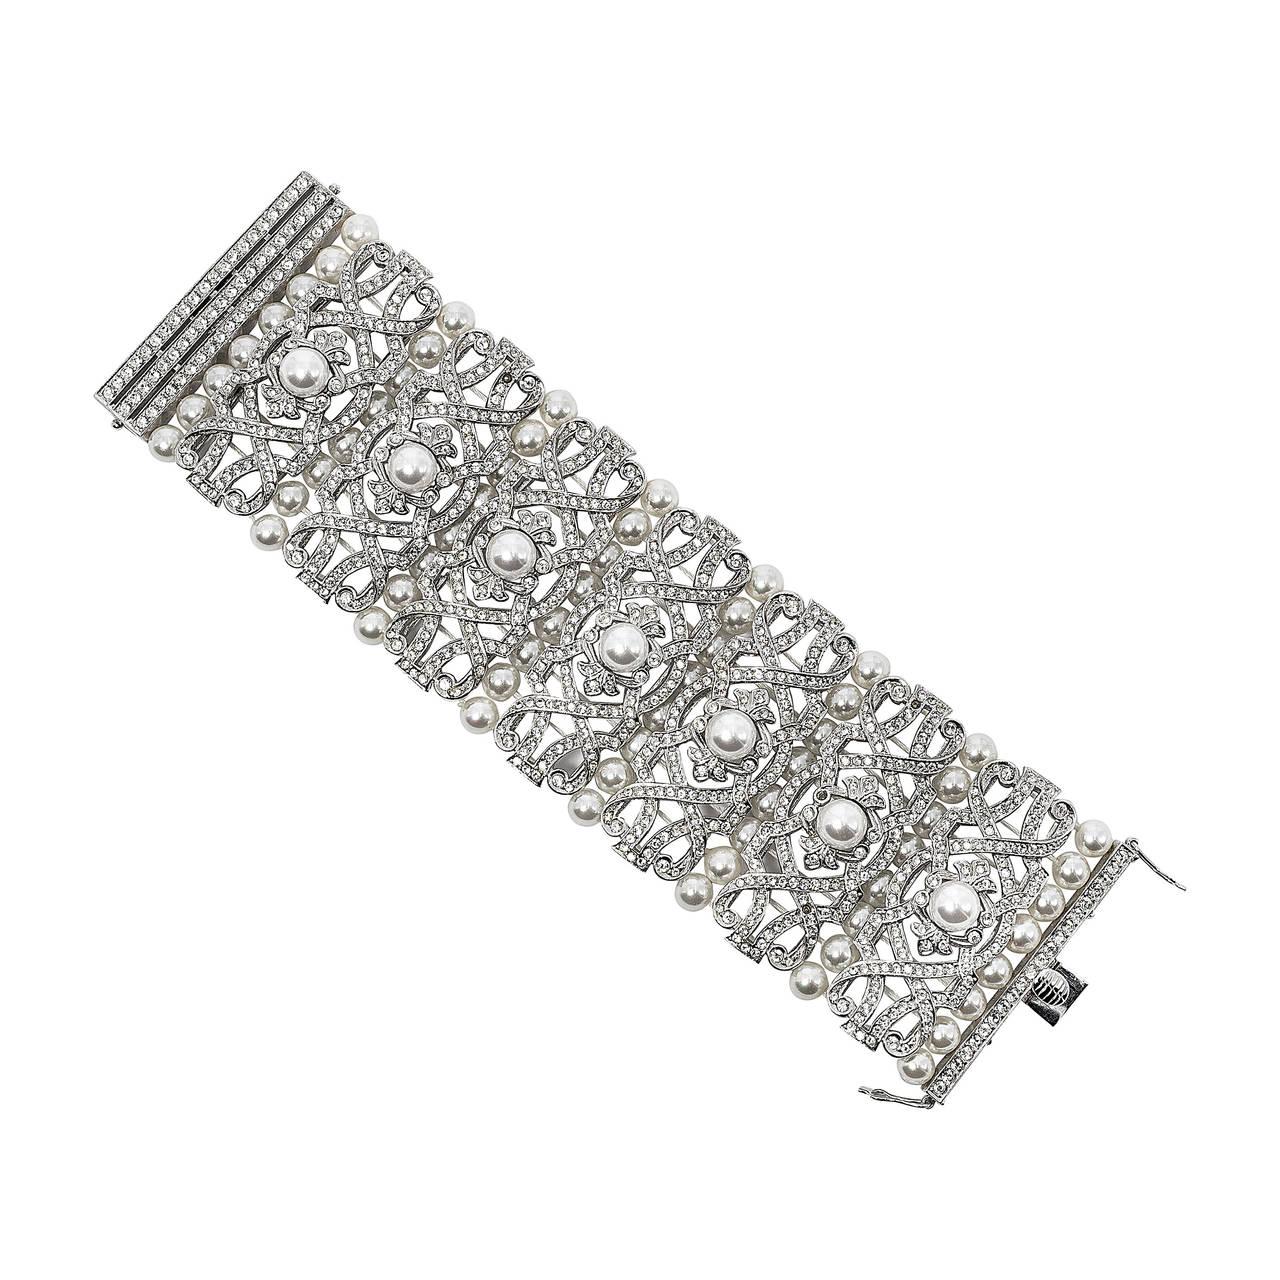 Fabulous wide Art Deco Style faux diamond pearl sterling bracelet of amazingly intricate work. Handmade and in mint condition, never worn. Unique and rare belonging to an archival collection of magnificent costume jewels. measures 7 inches long and